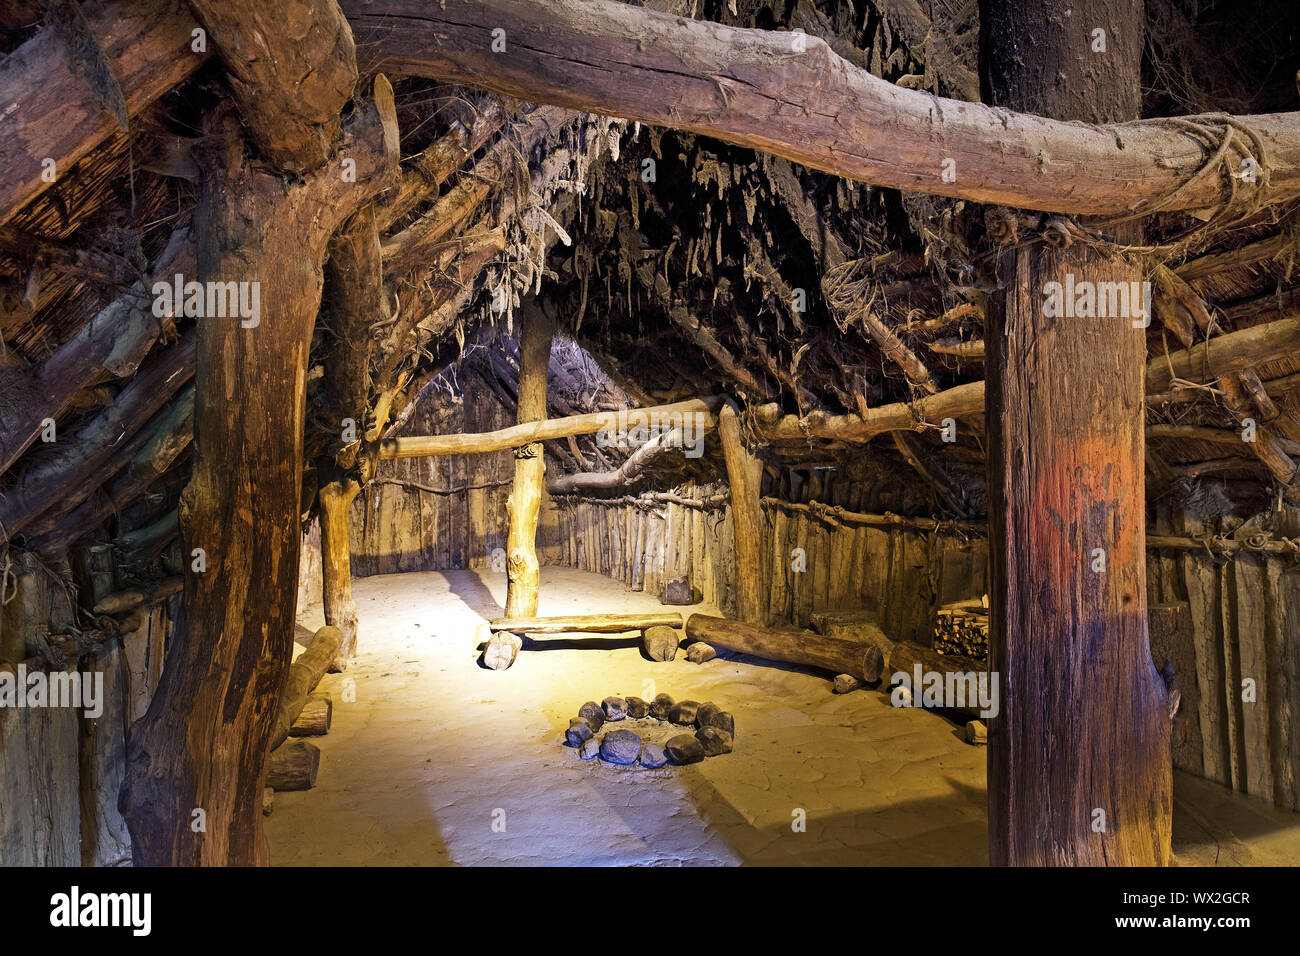 inside view of Neolithic house, Archaeological open-air museum, Oerlinghausen, Germany, Europe Stock Photo